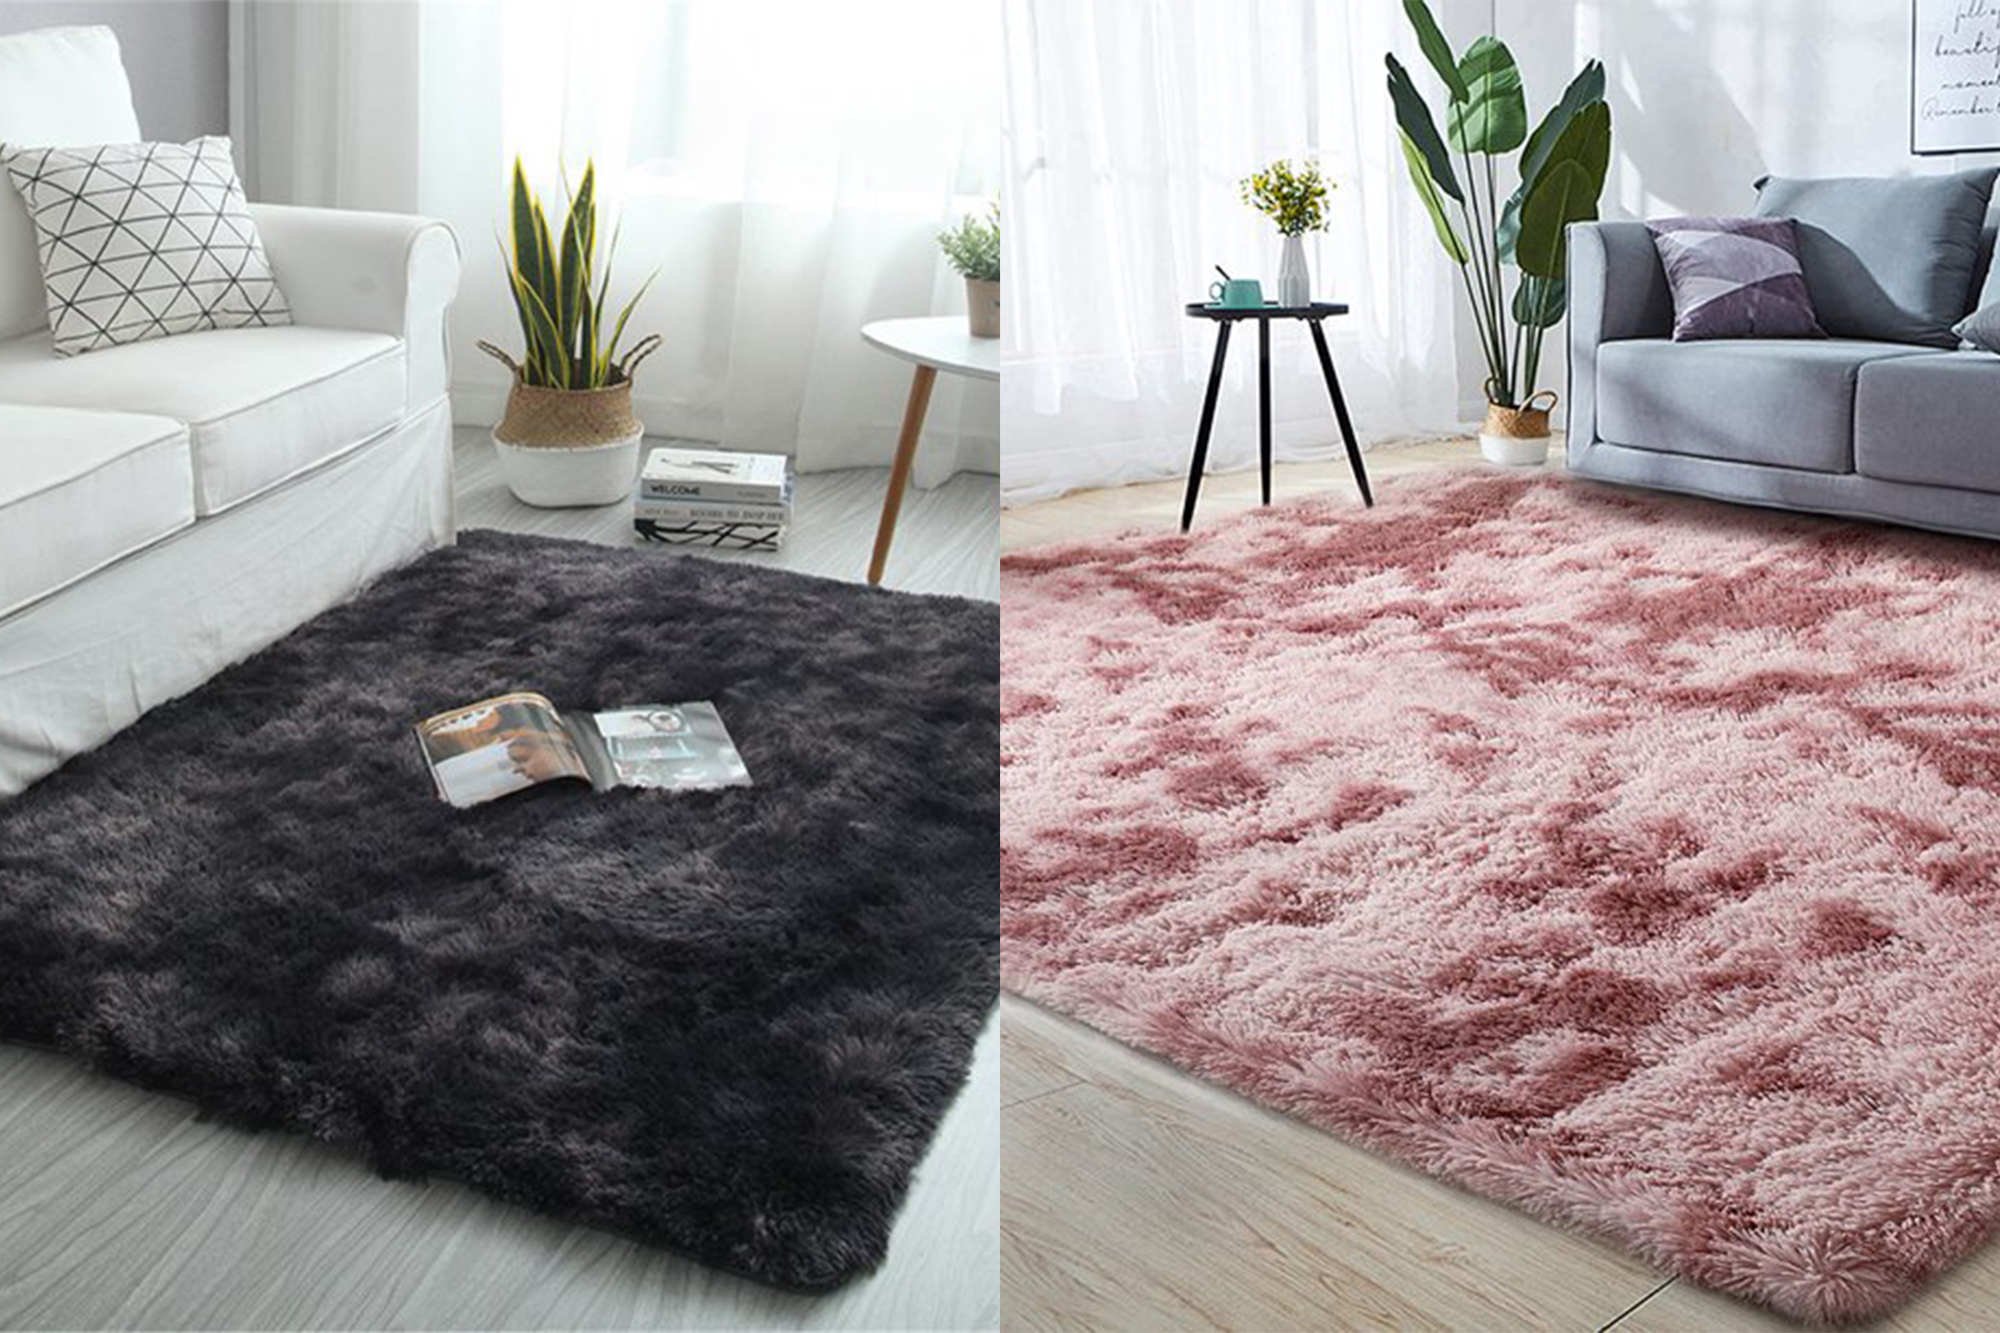 Neutral Shaggy Rugs Soft Fluffy Beige Area Rug Giant Living Room Rug Cheap NEW 